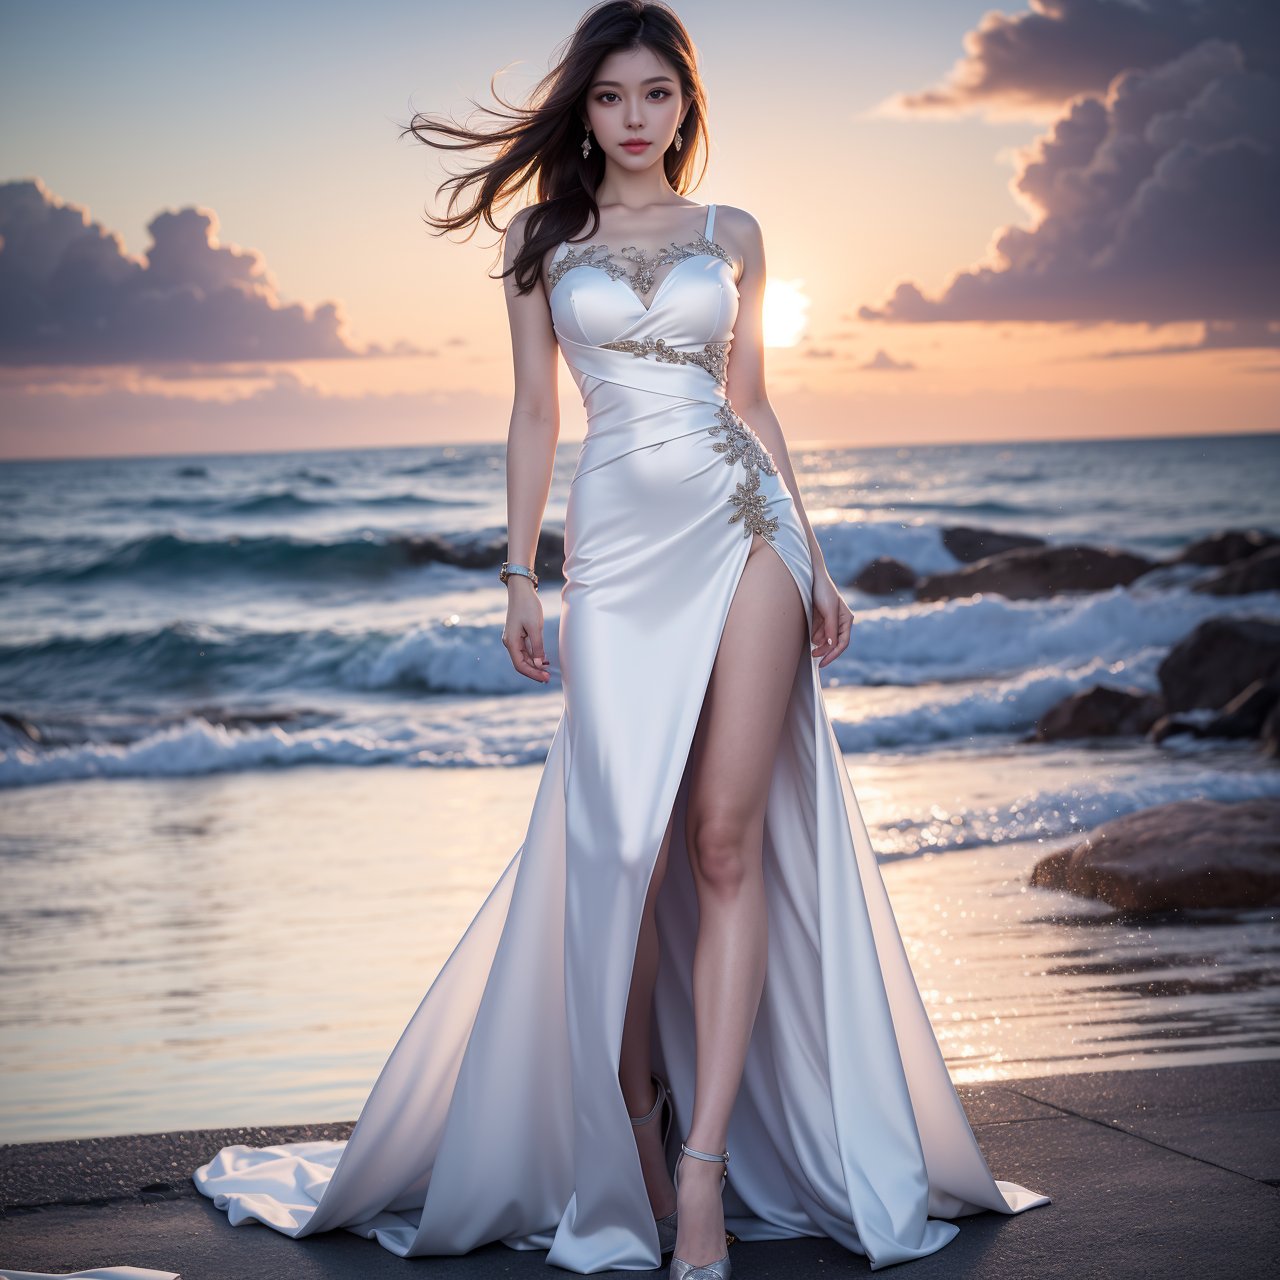 ((Full-Body)), 1female hot model, black hair, wearing ((a white youth elegant daily dress)), full detail, perfect viewpoint, highly detailed, wide-angle lens, hyper realistic, with dramatic sky, polarizing filter, natural lighting, vivid colors, sunset,